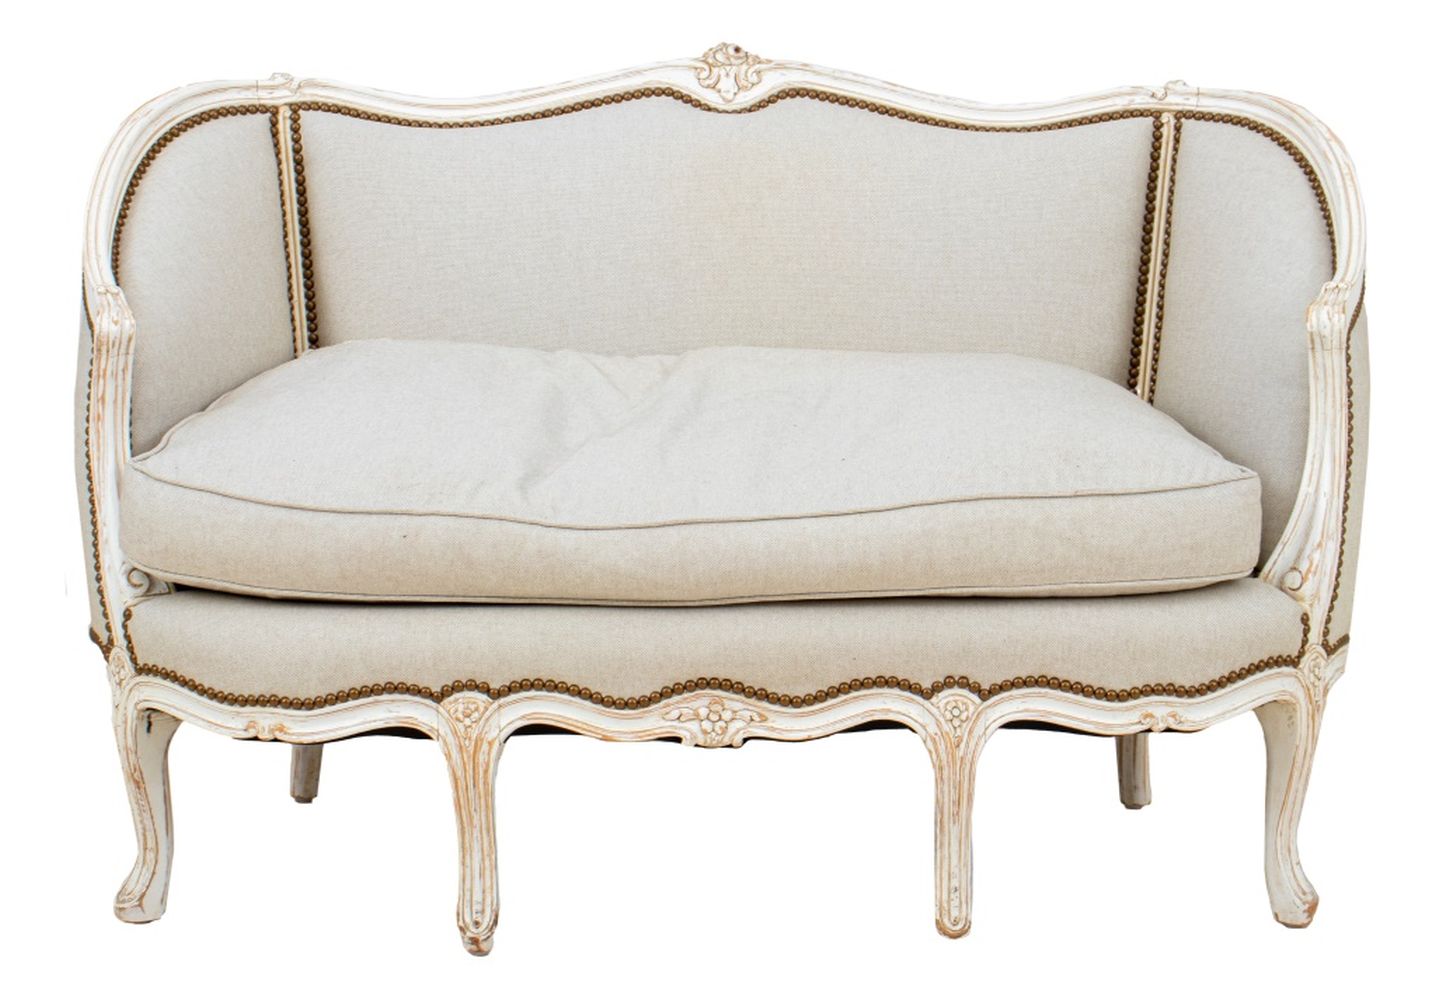 FRENCH LOUIS XV STYLE WHITE PAINTED 3ce743